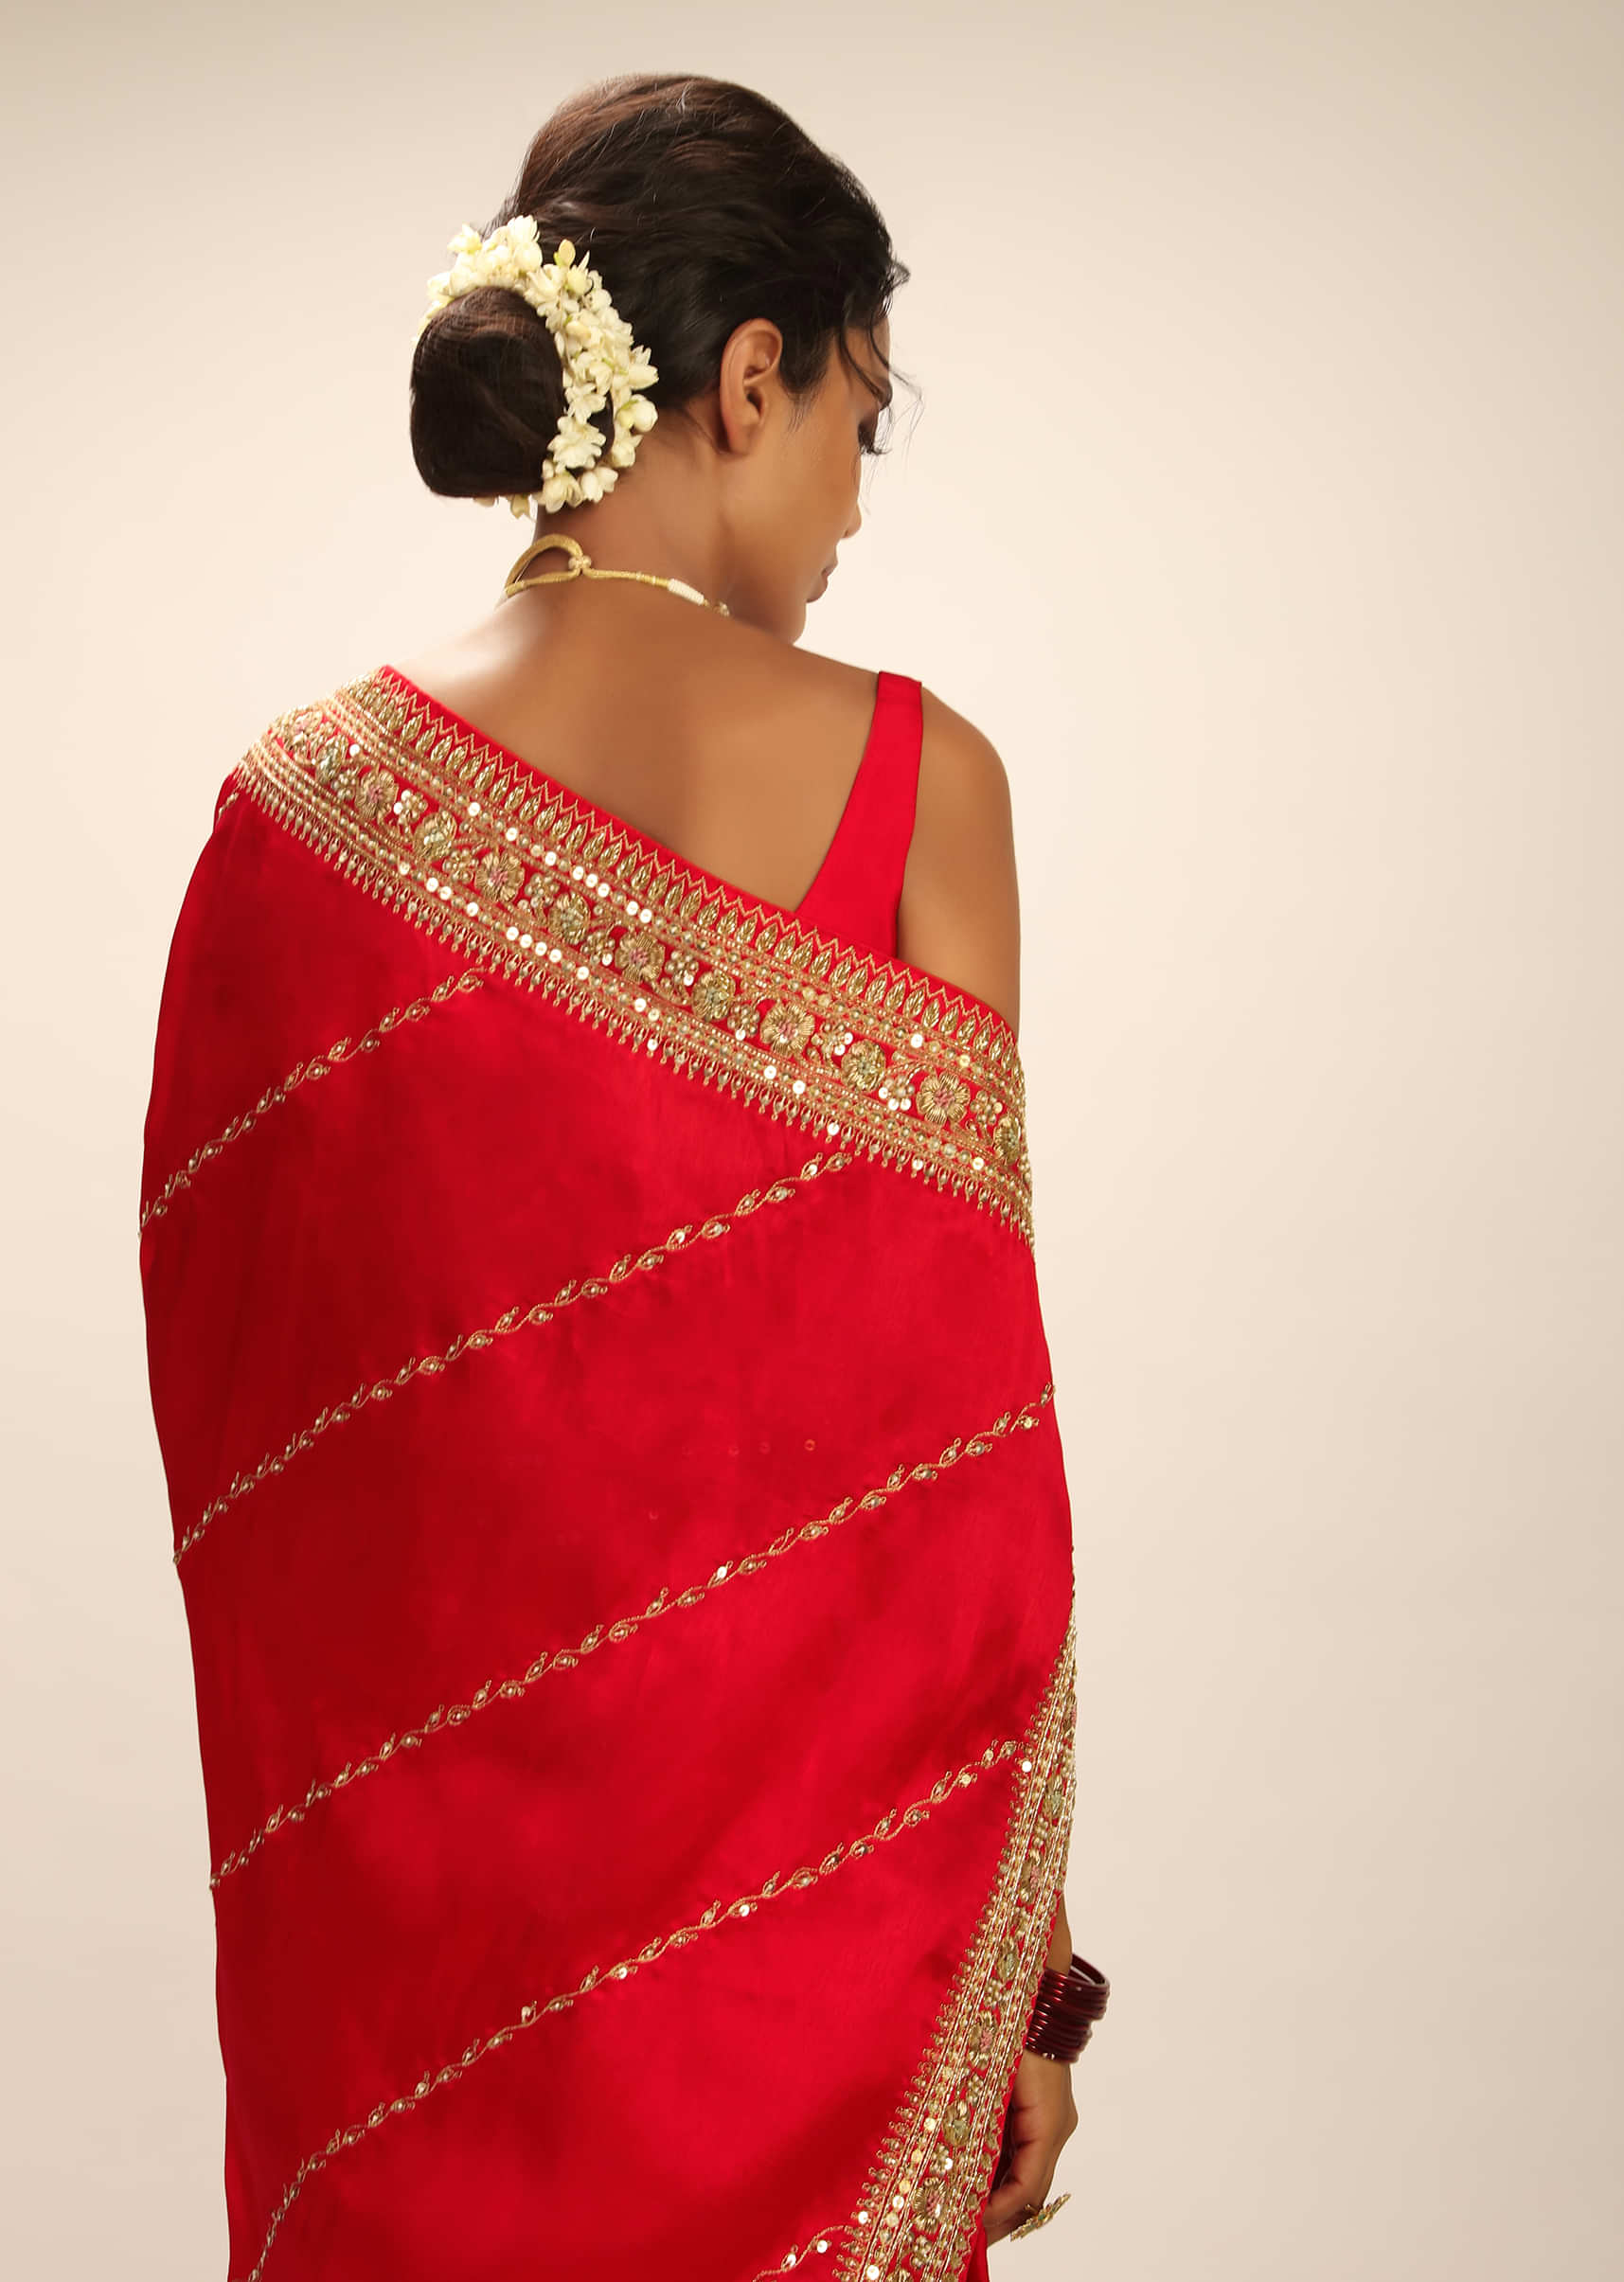 True Red Purple Saree In Dupion Silk With Hand Embroidered Embroidered Stripes And Floral Border 